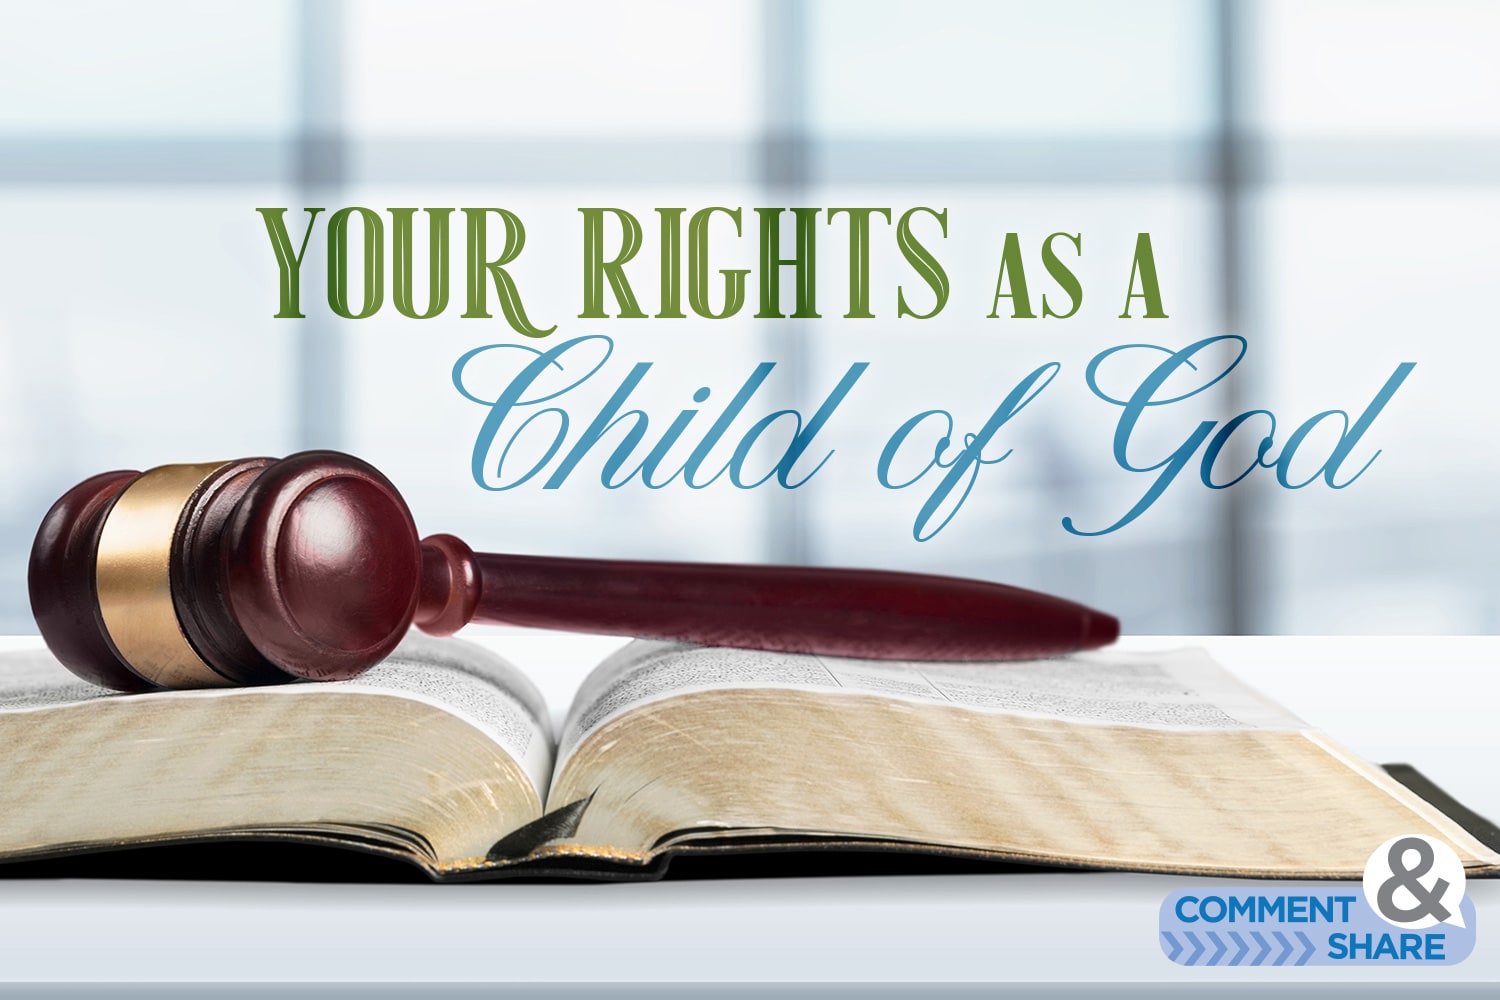 Your Rights As a Child of God